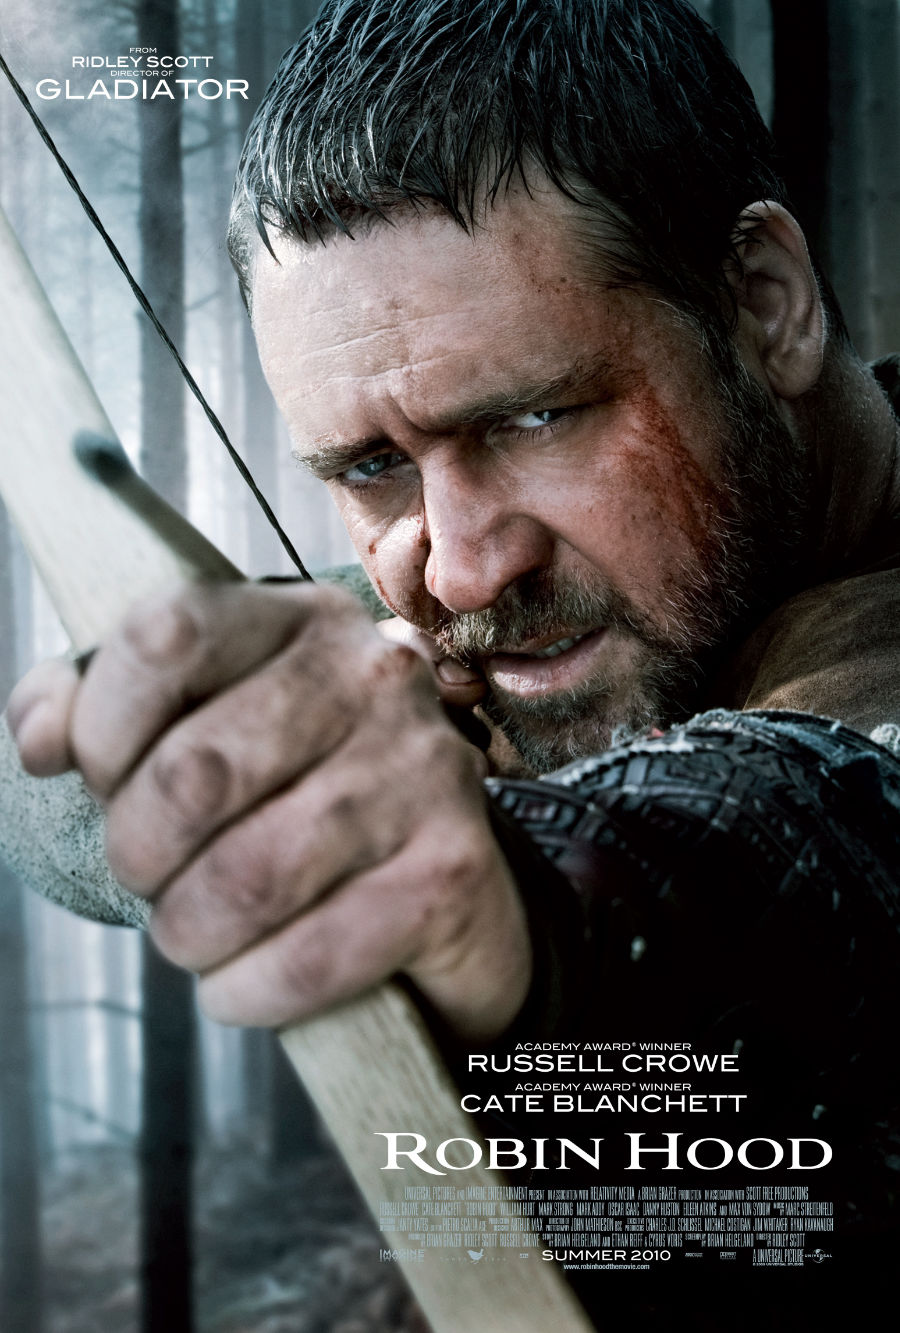 You are currently viewing Notes On A Film: Robin Hood